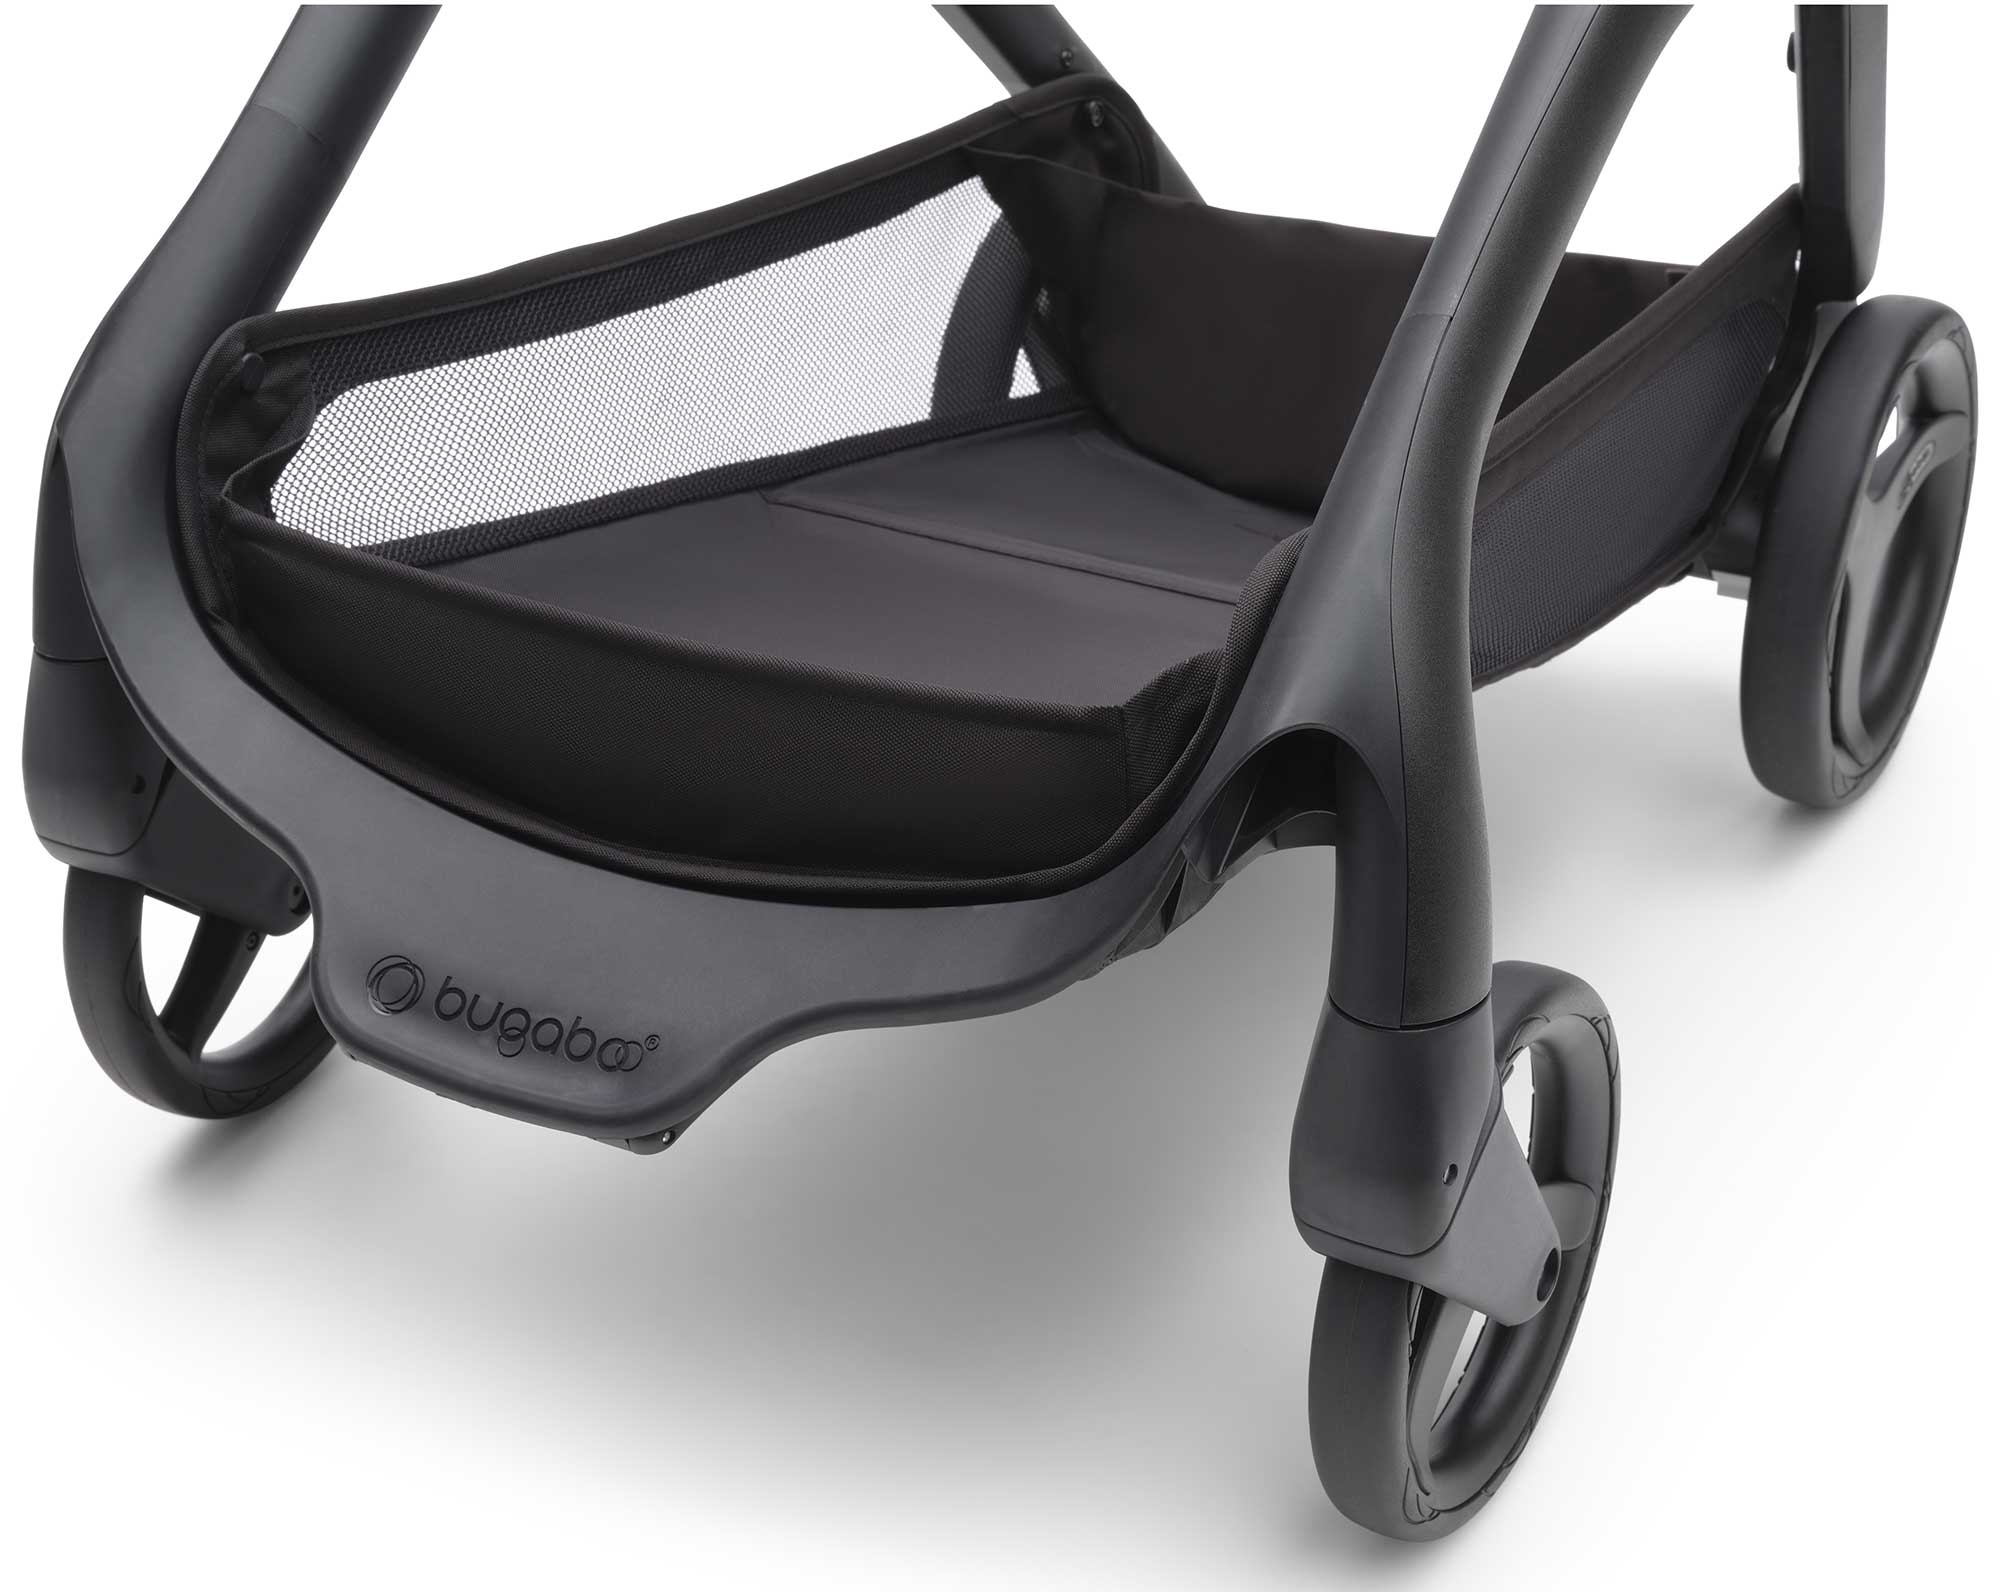 Bugaboo Pushchairs & Buggies Bugaboo Dragonfly Complete Pushchair in Black/Midnight Black 100176040